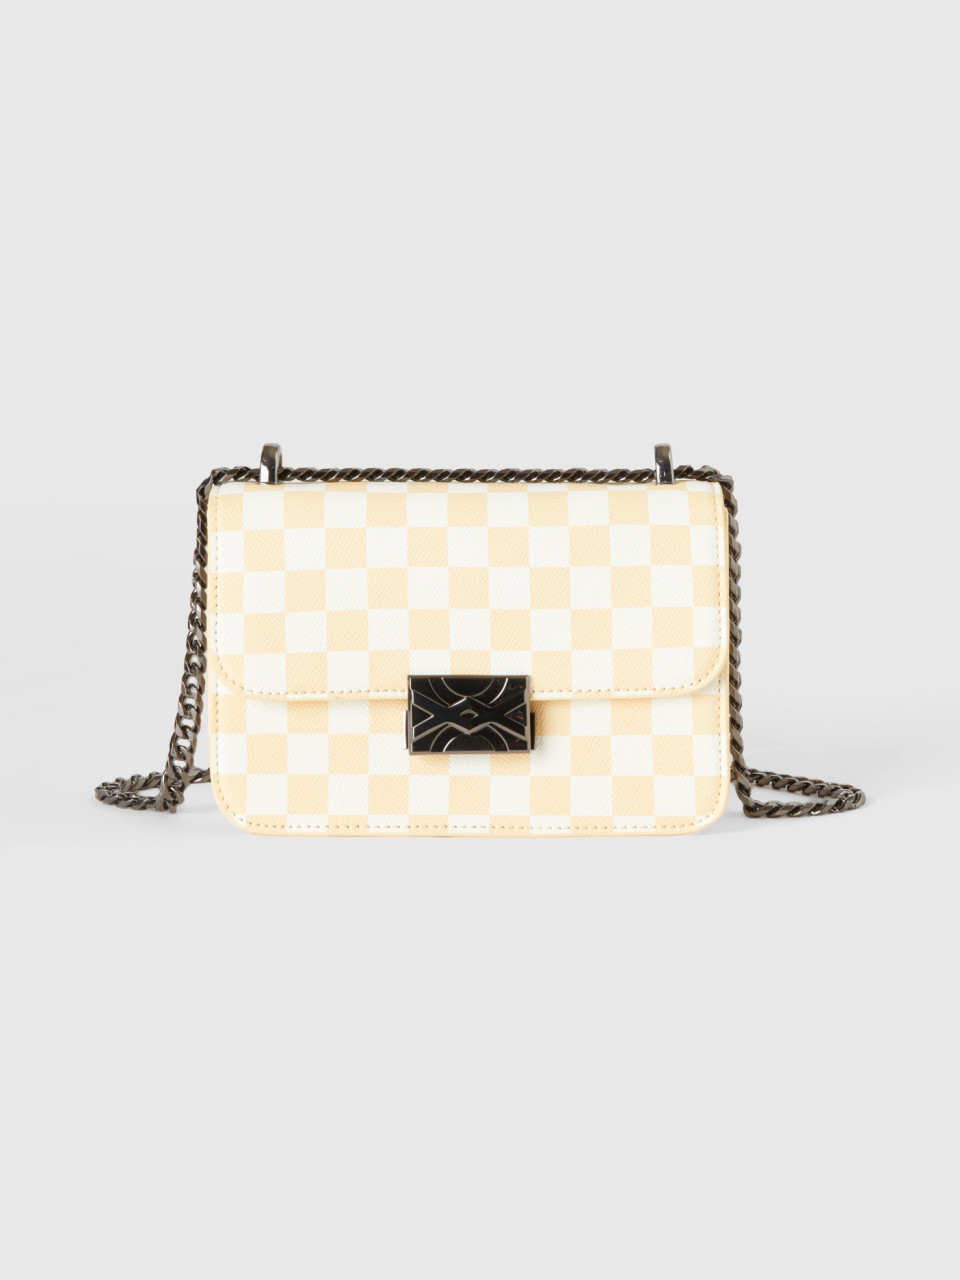 Benetton, Small Be Bag In White And Yellow Checkers, Multi-color, Women